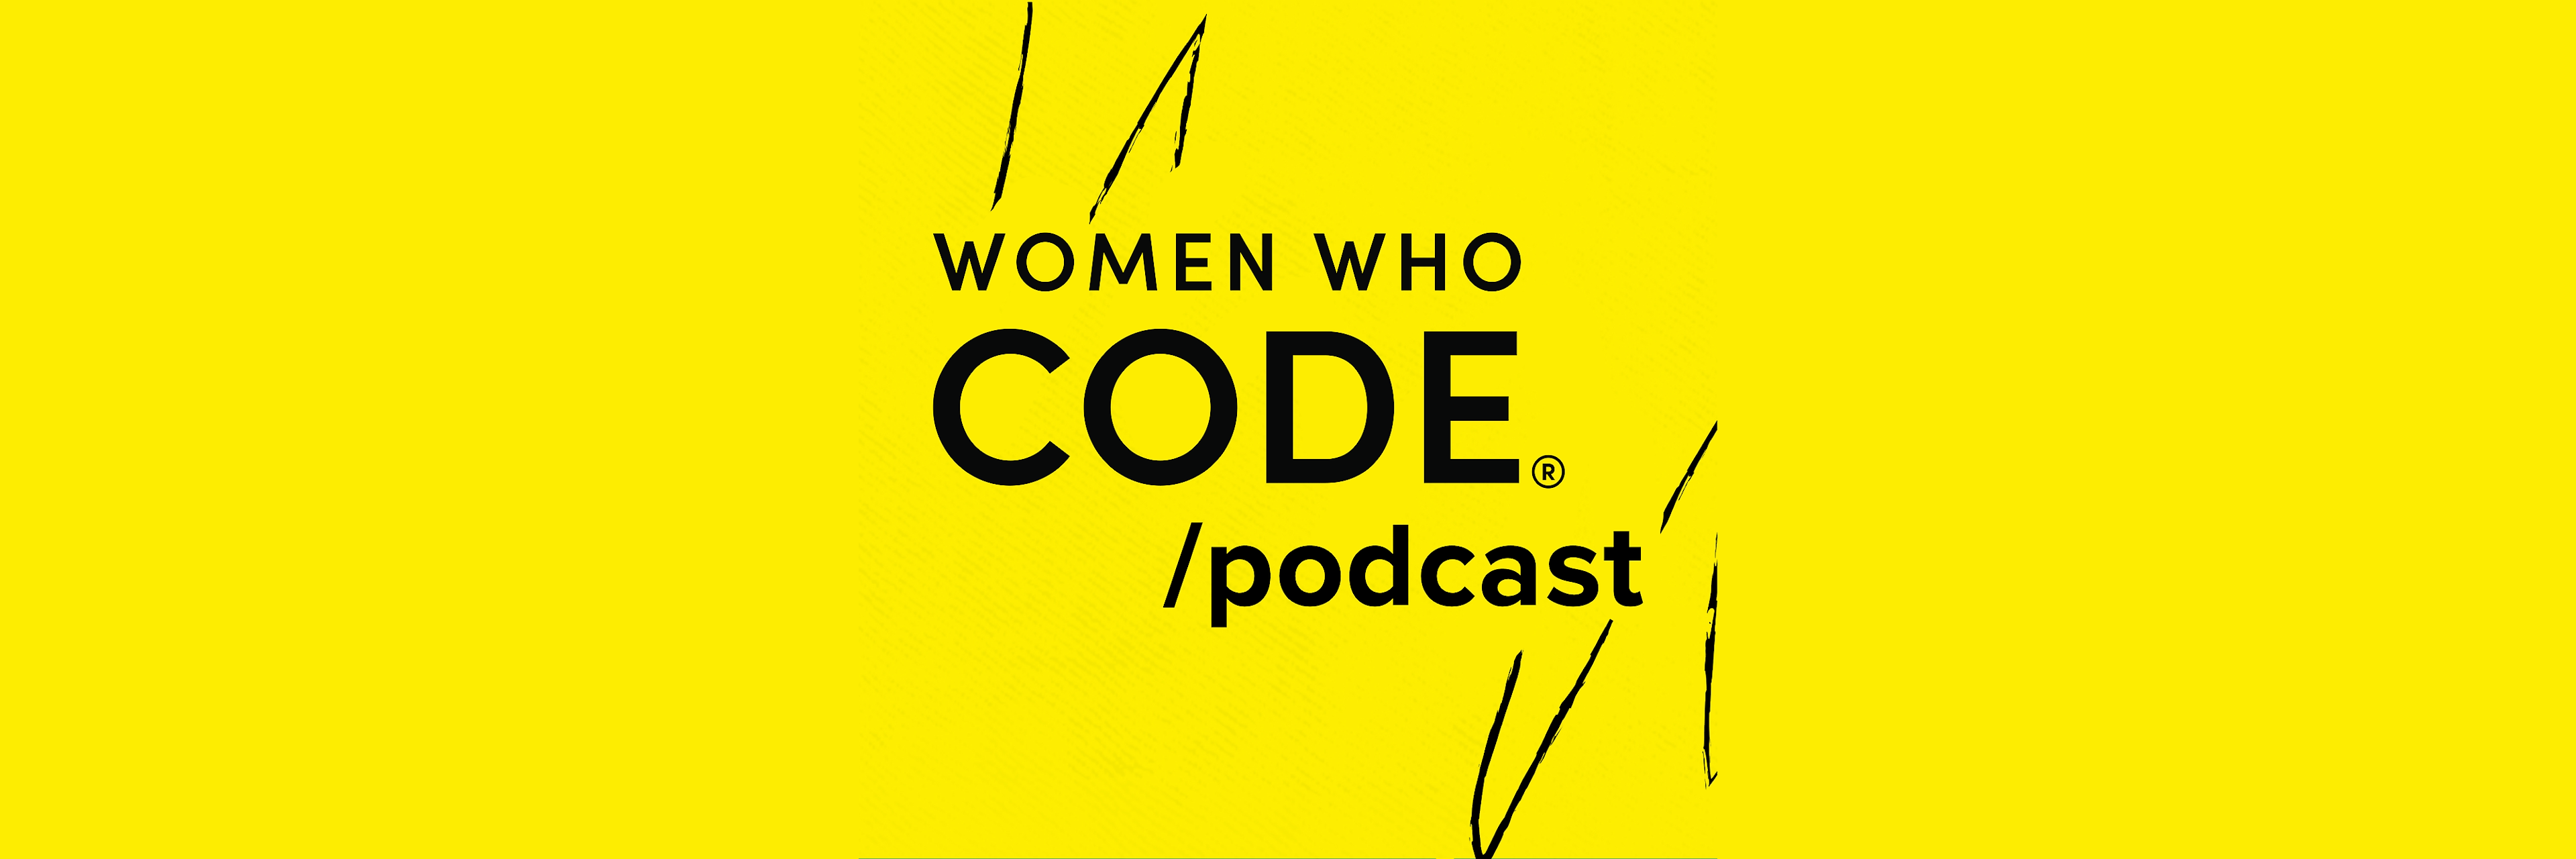 WWCode Conversations #57: Growing Together: The Impact of Community on Career